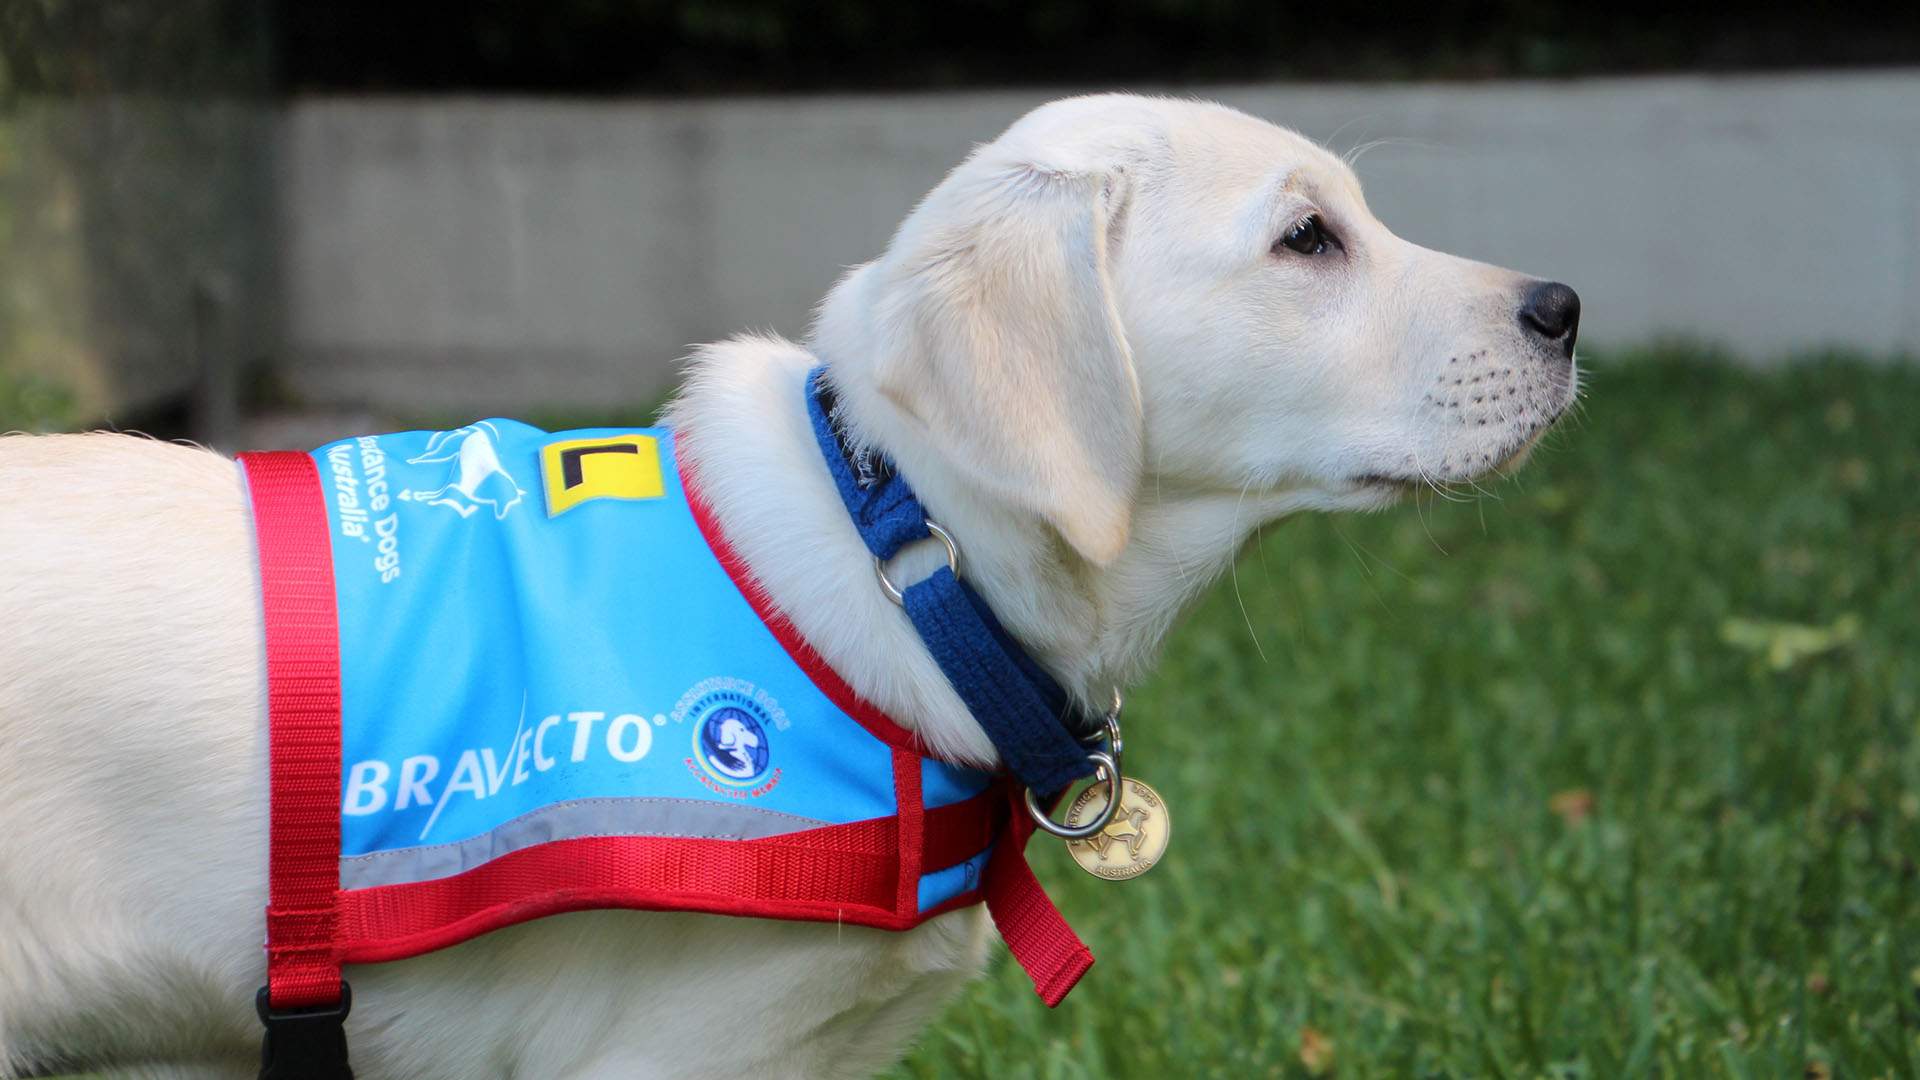 Assistance Dogs Australia Wants You To Name One of Its Super Cute Puppies